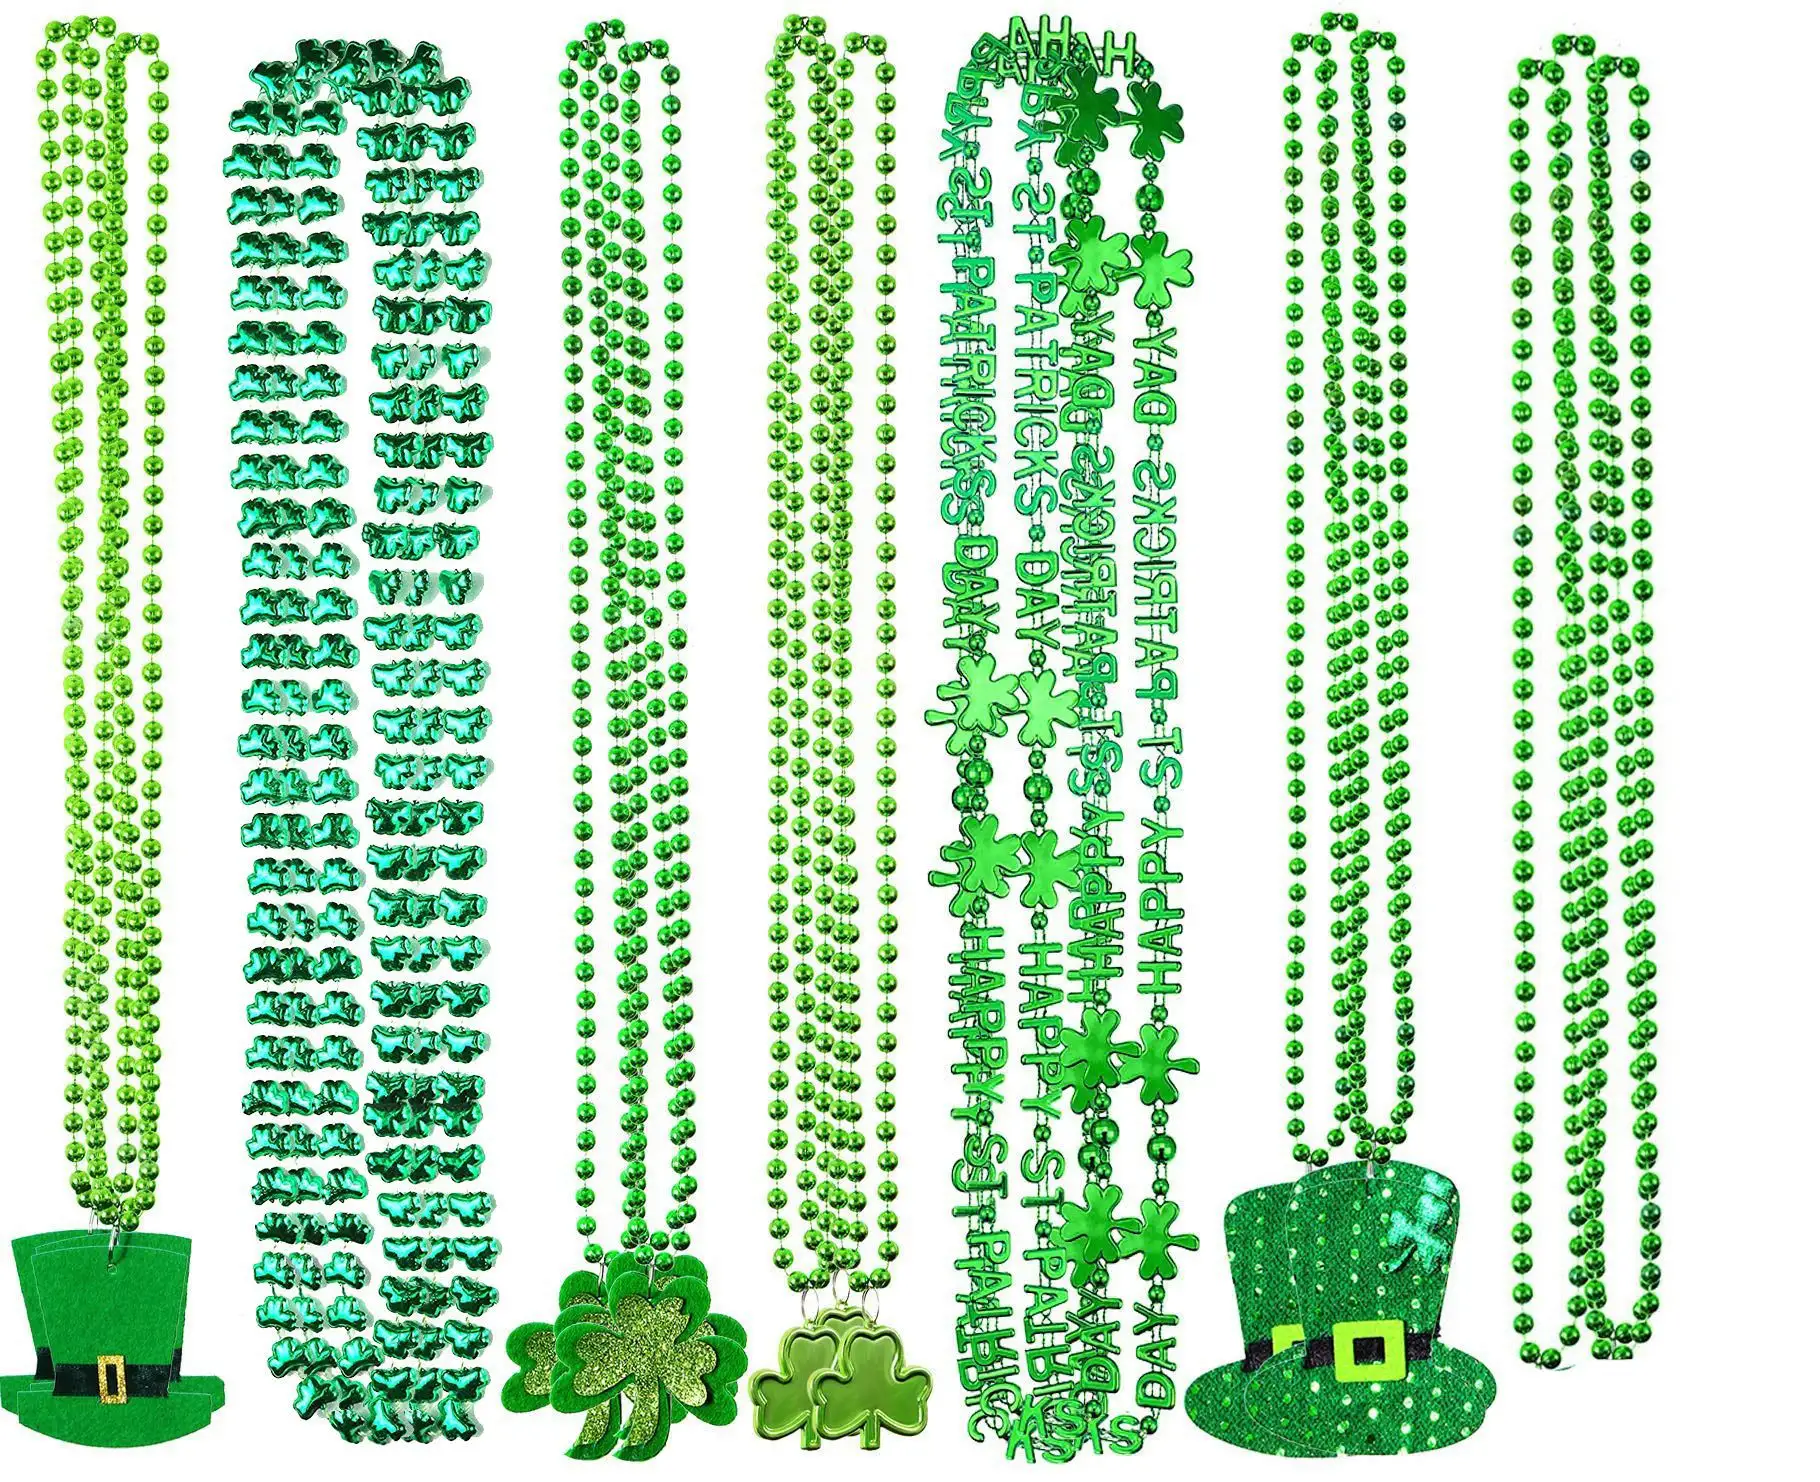 Hot Sale Irish Festival New Green Shamrock Happy St Patrick's Day Plastic Bead Necklace St.Patrick Dance Party Accessories